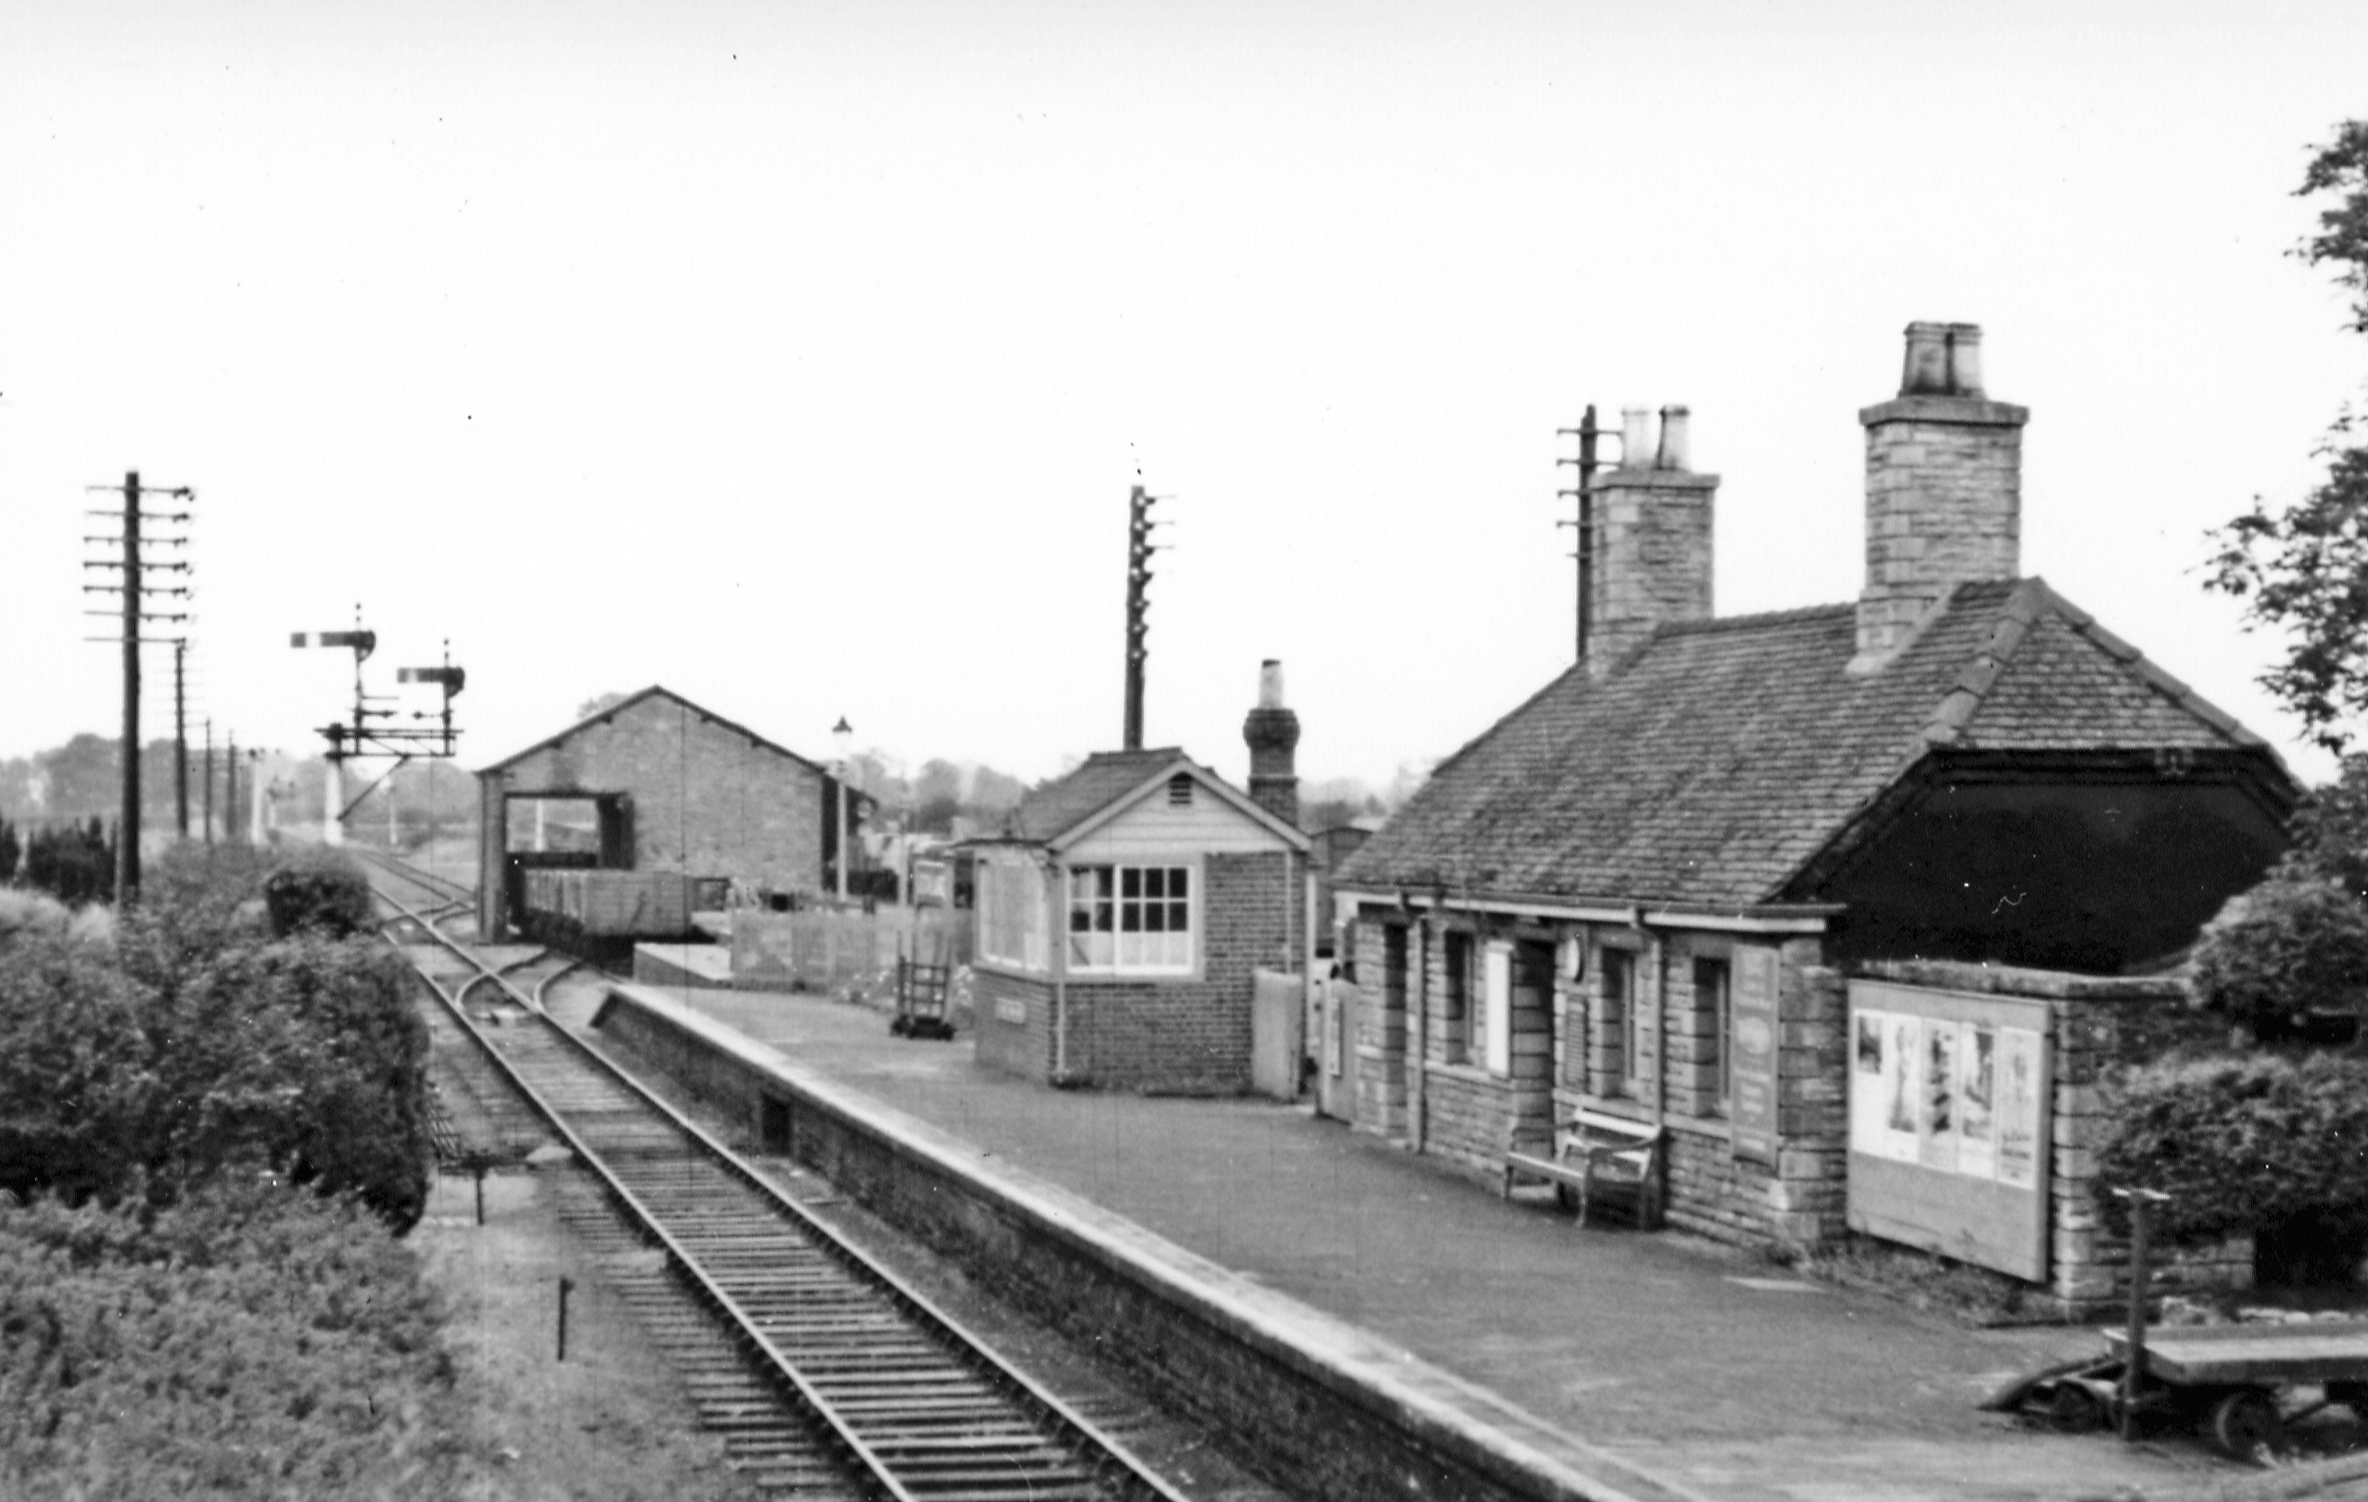 Lechlade railway station